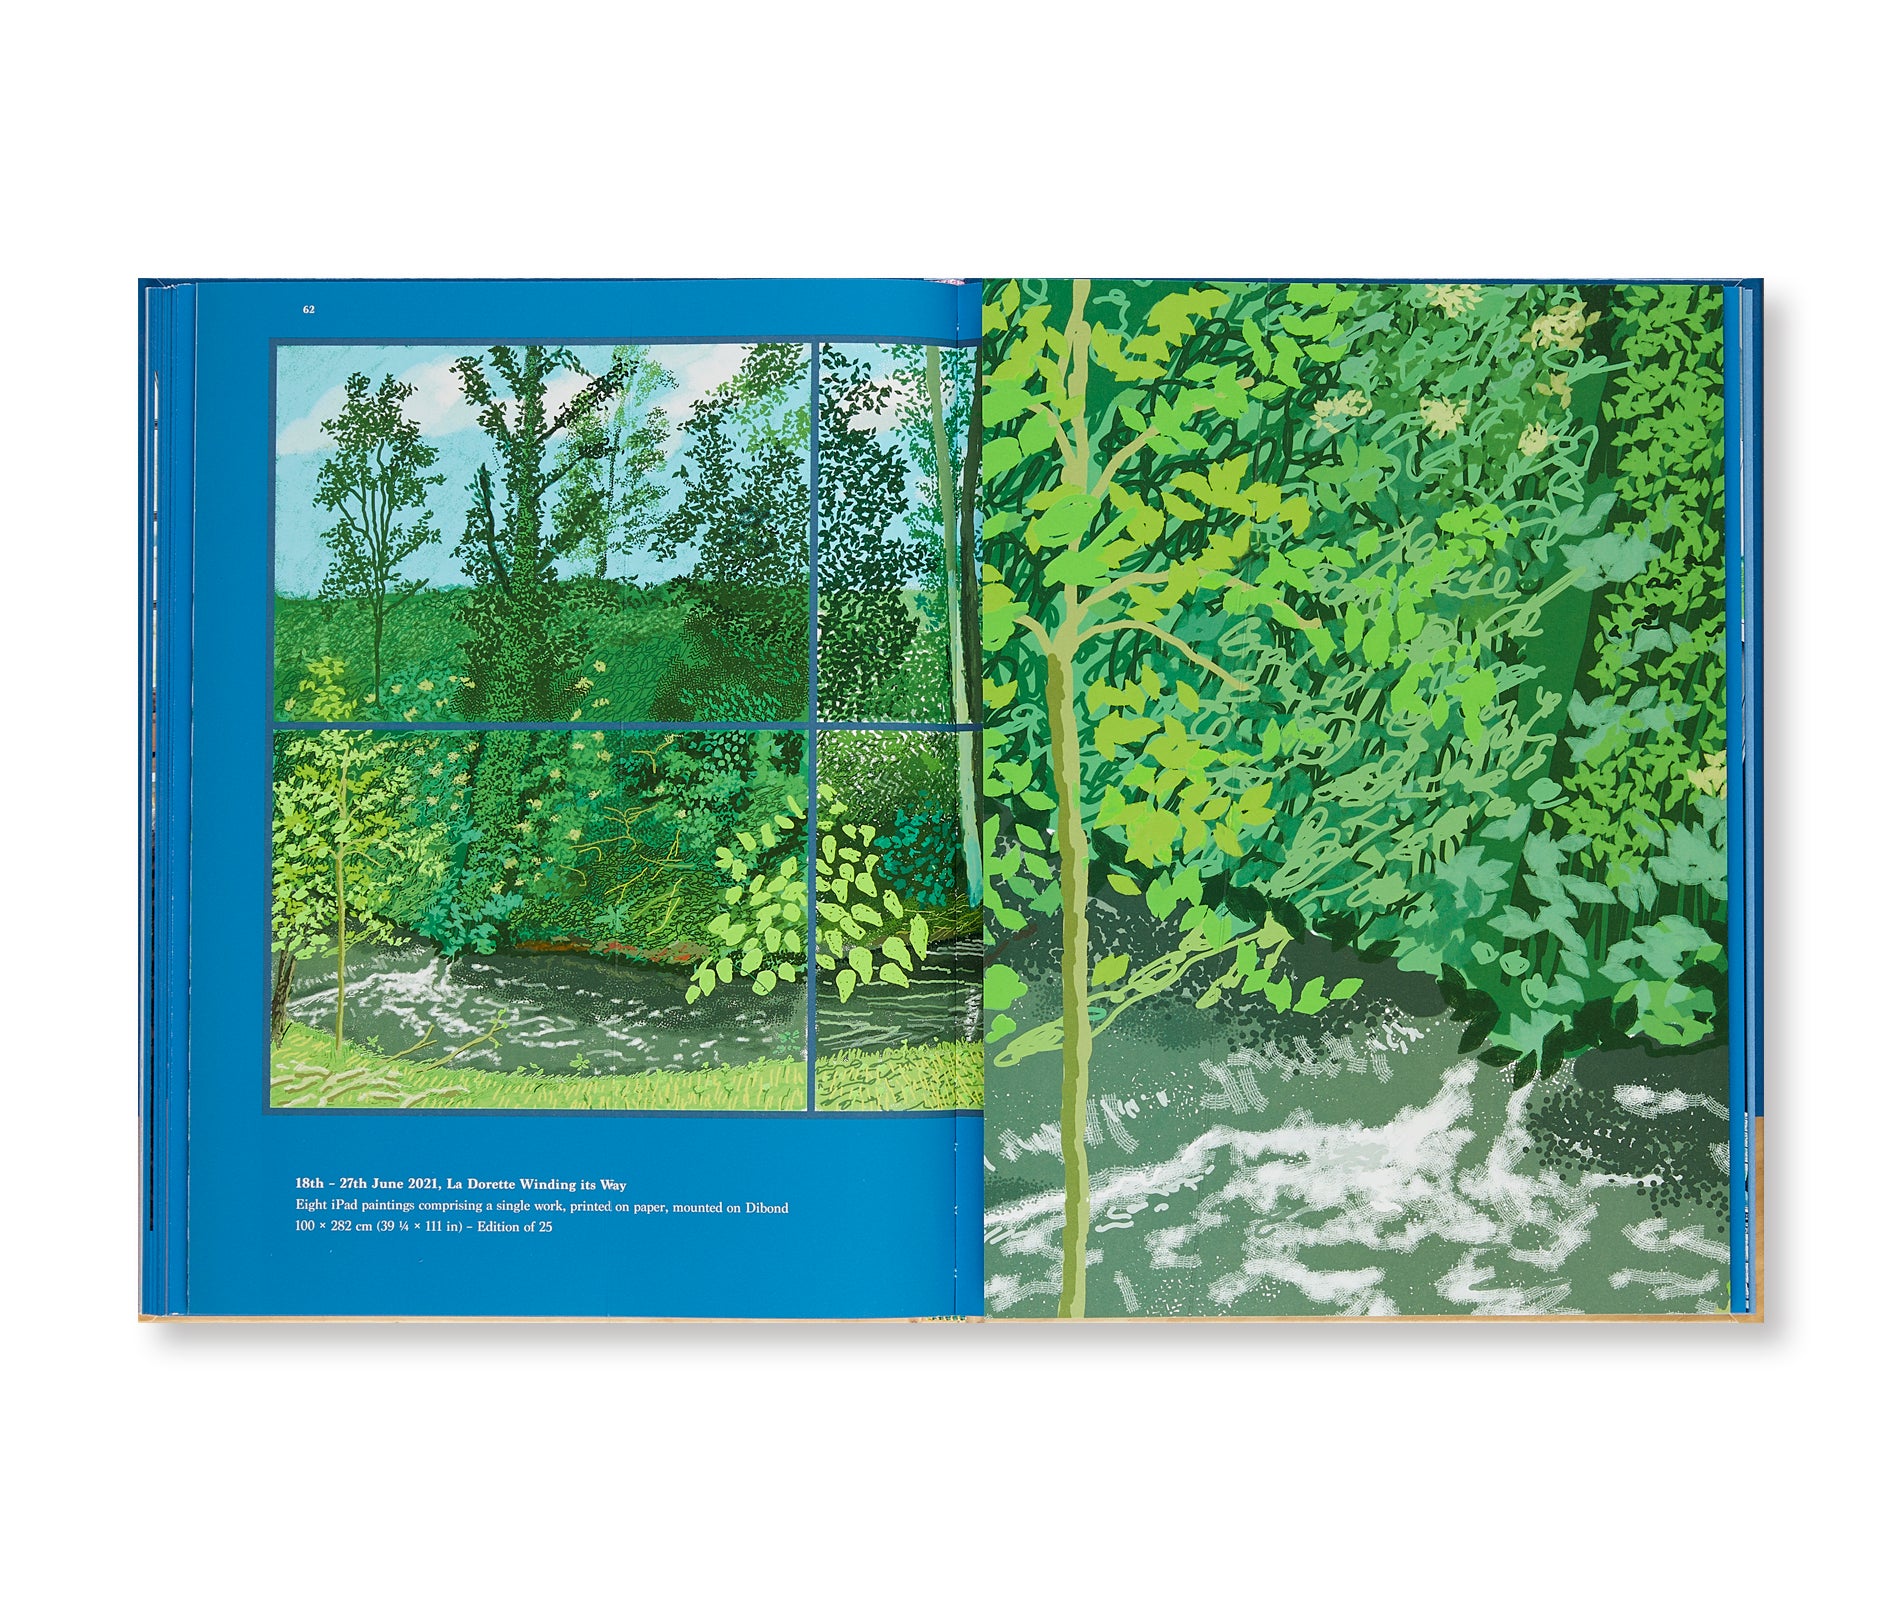 20 FLOWERS AND SOME BIGGER PICTURES by David Hockney